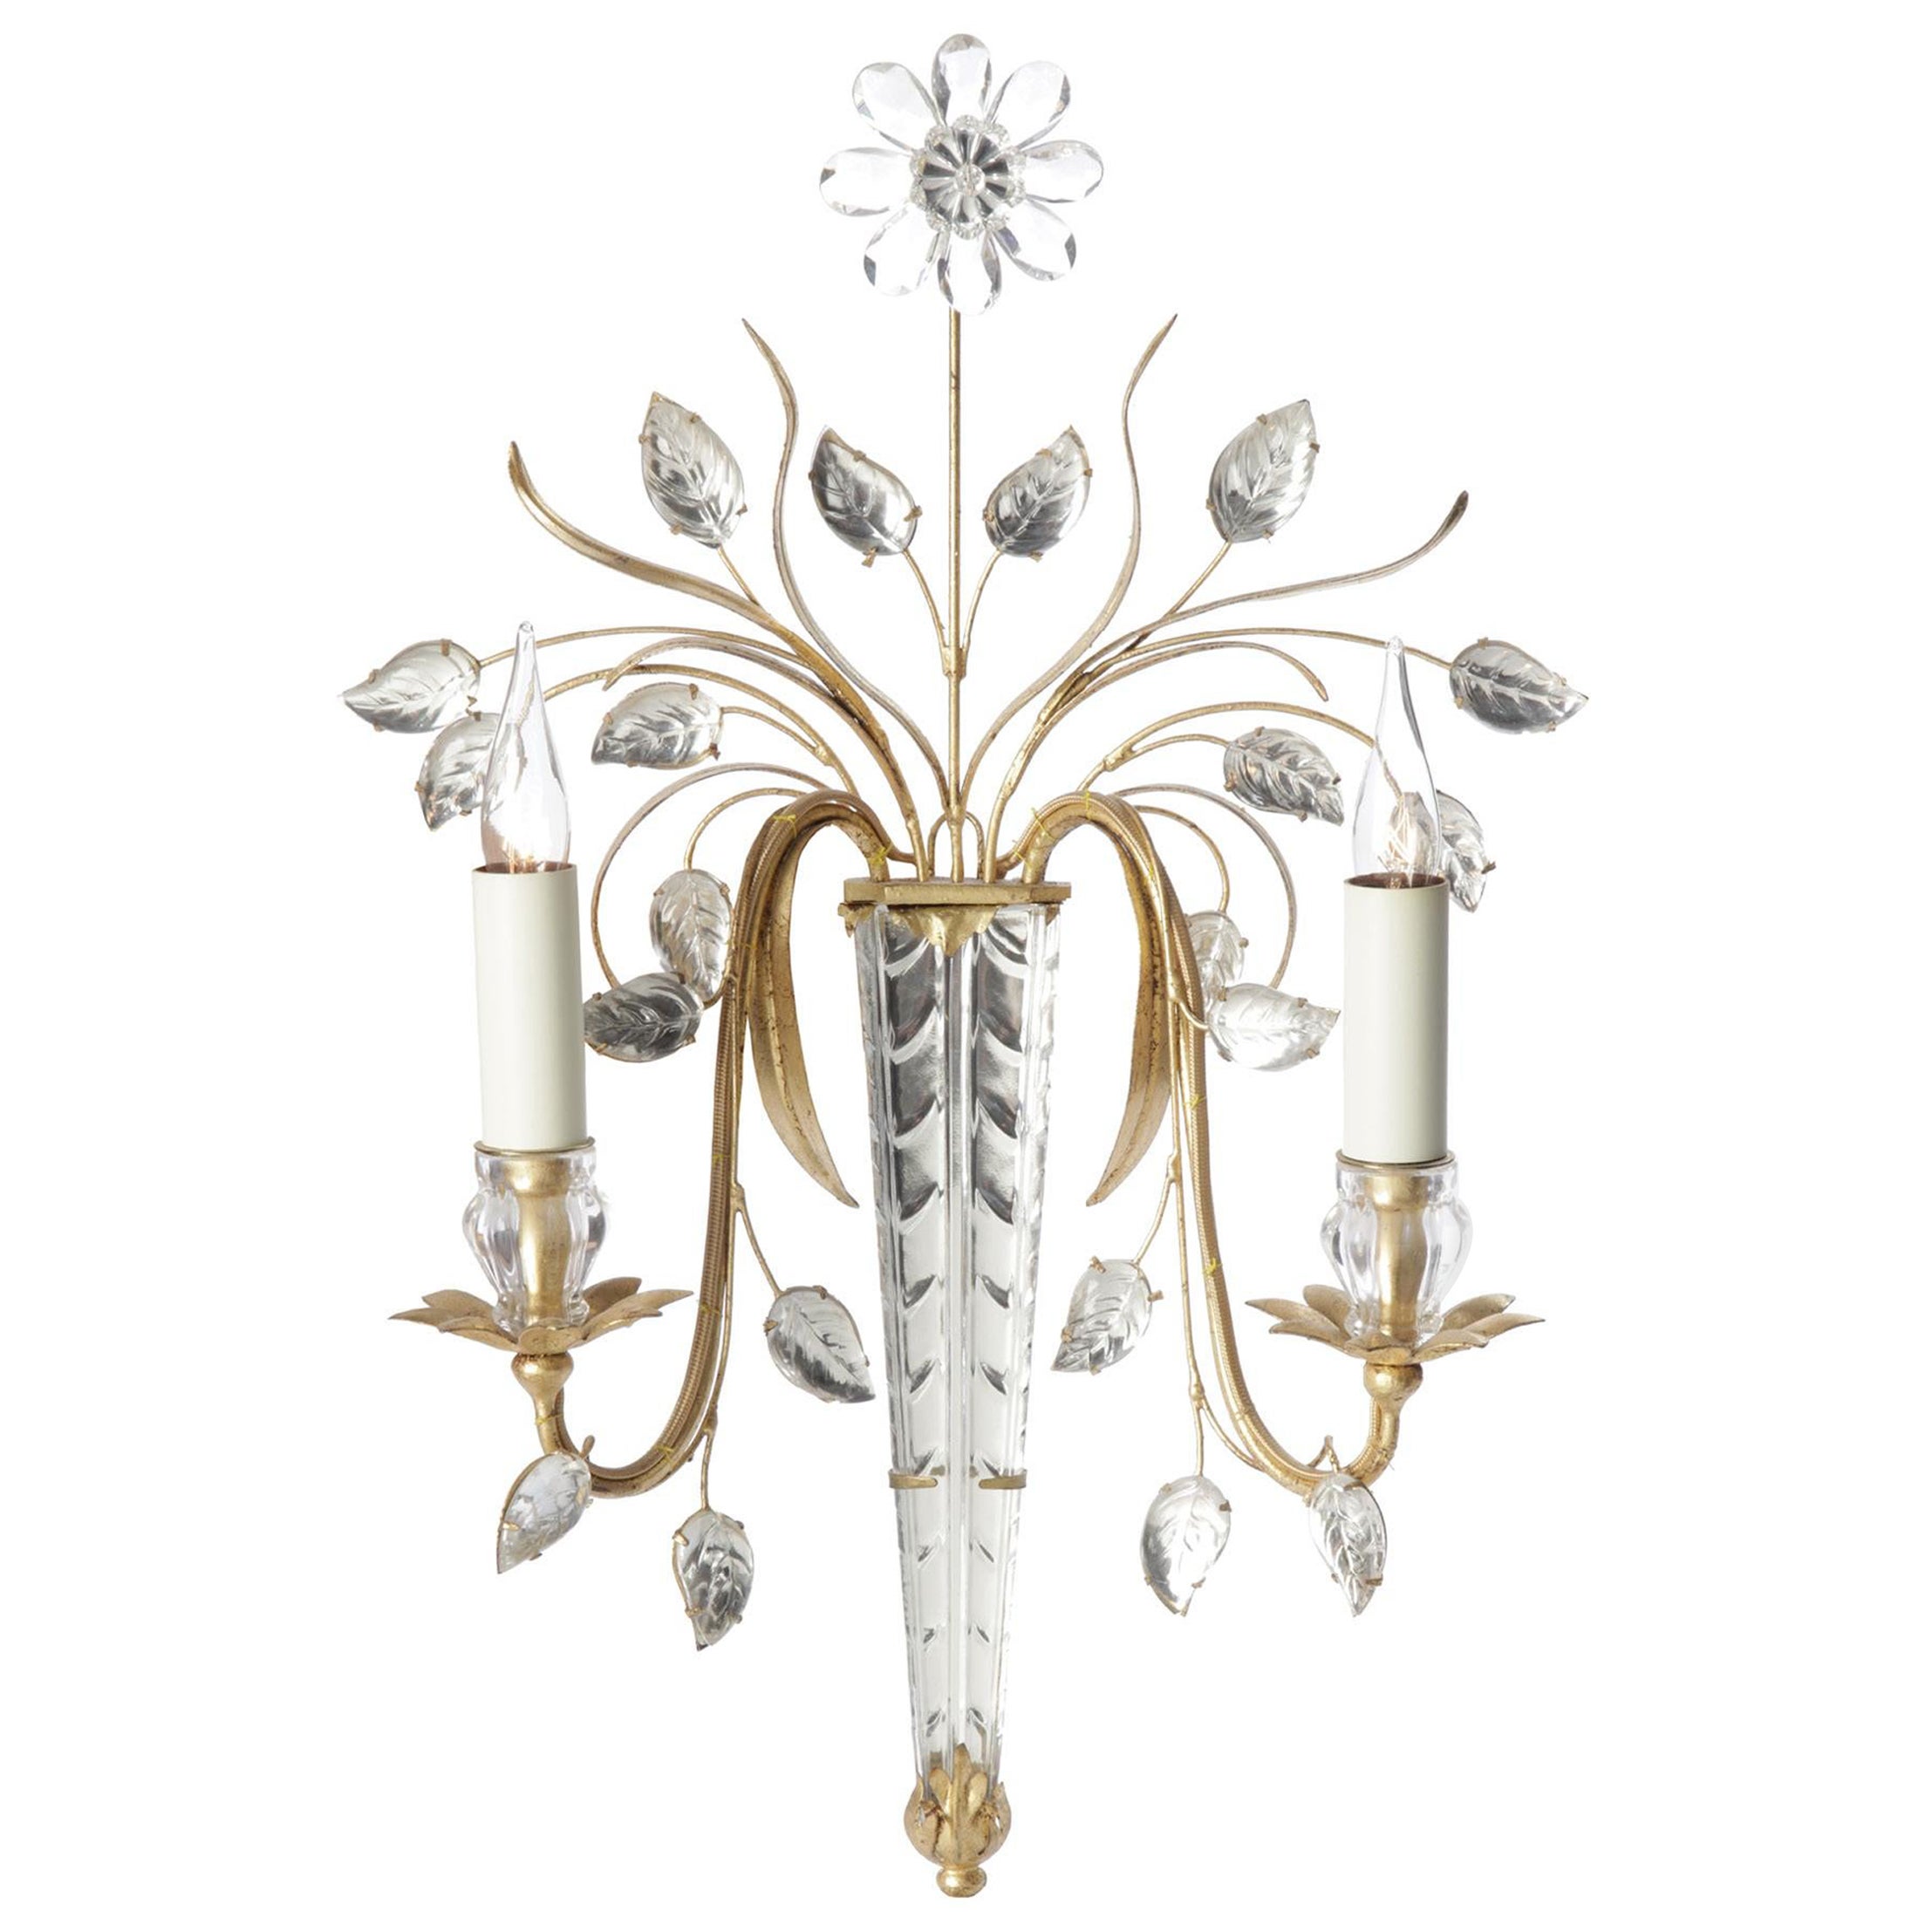 Certified Maison Bagues Sconce, Iron and Crystal 2 Lights #00160 For Sale